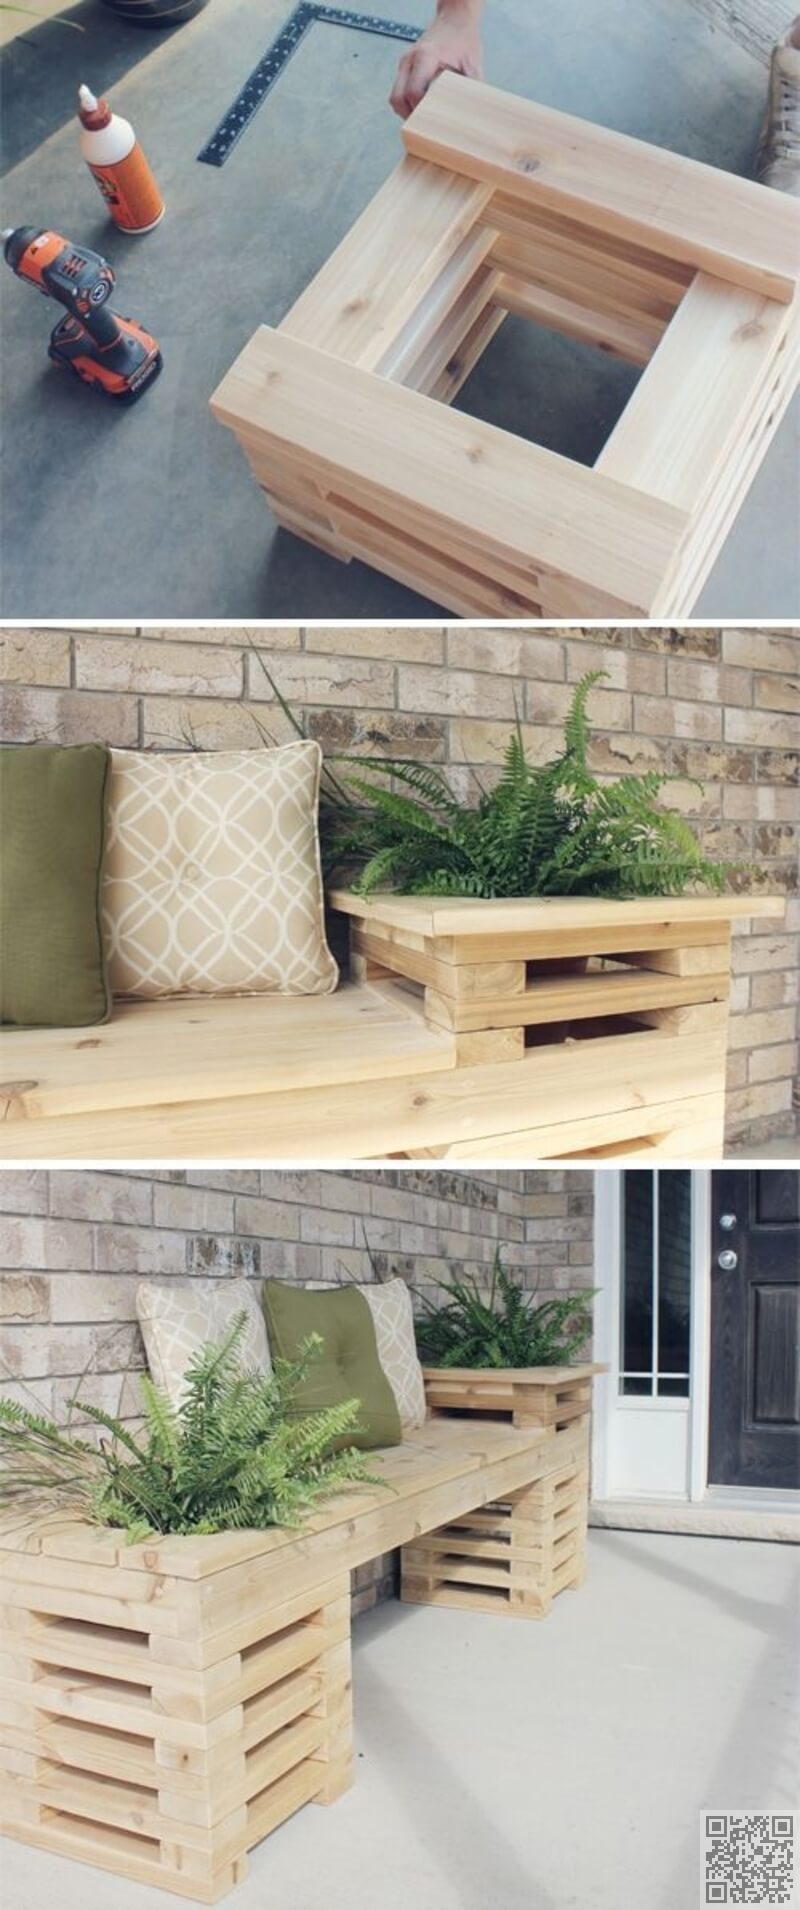 Wooden Plant Boxes with Built-in Bench